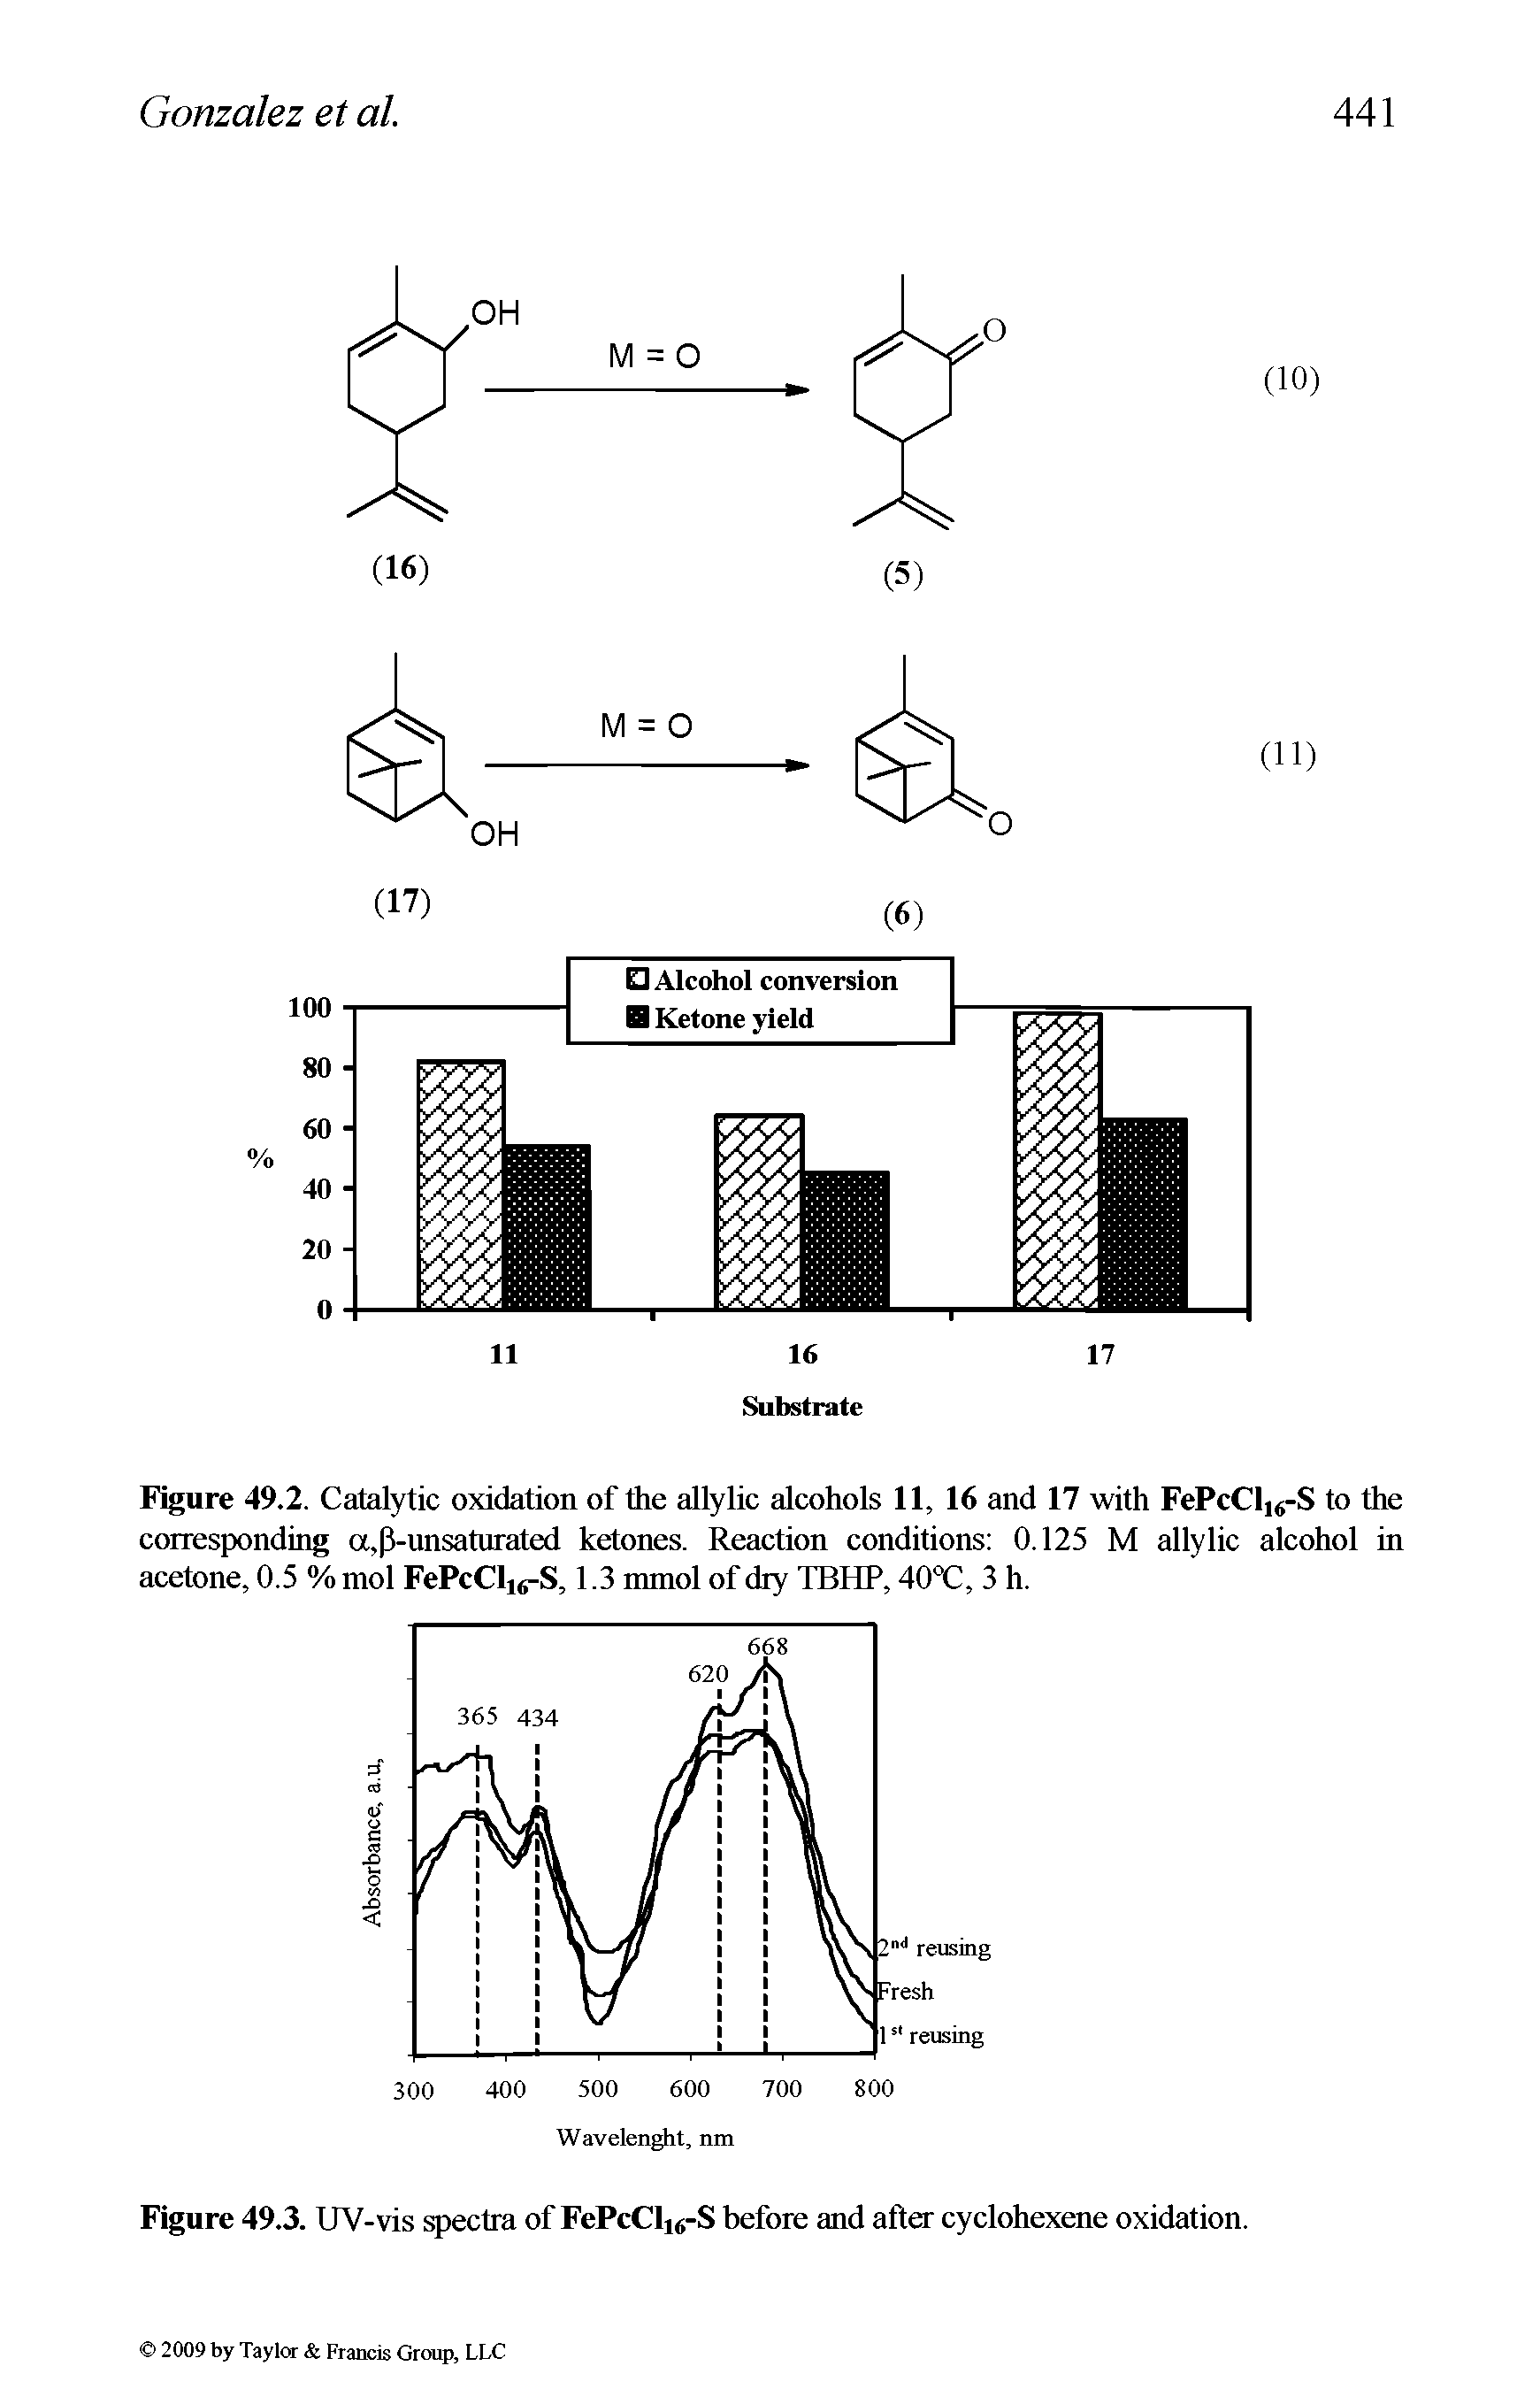 Figure 49.2. Catalytic oxidation of the allylic alcohols 11, 16 and 17 with FePcCli -S to the corresponding a, 5-unsaturated ketones. Reaction conditions 0.125 M allylic alcohol in acetone, 0.5 % mol FePcClis-S, 1.3 mmol of dry TBHP, 40T, 3 h.